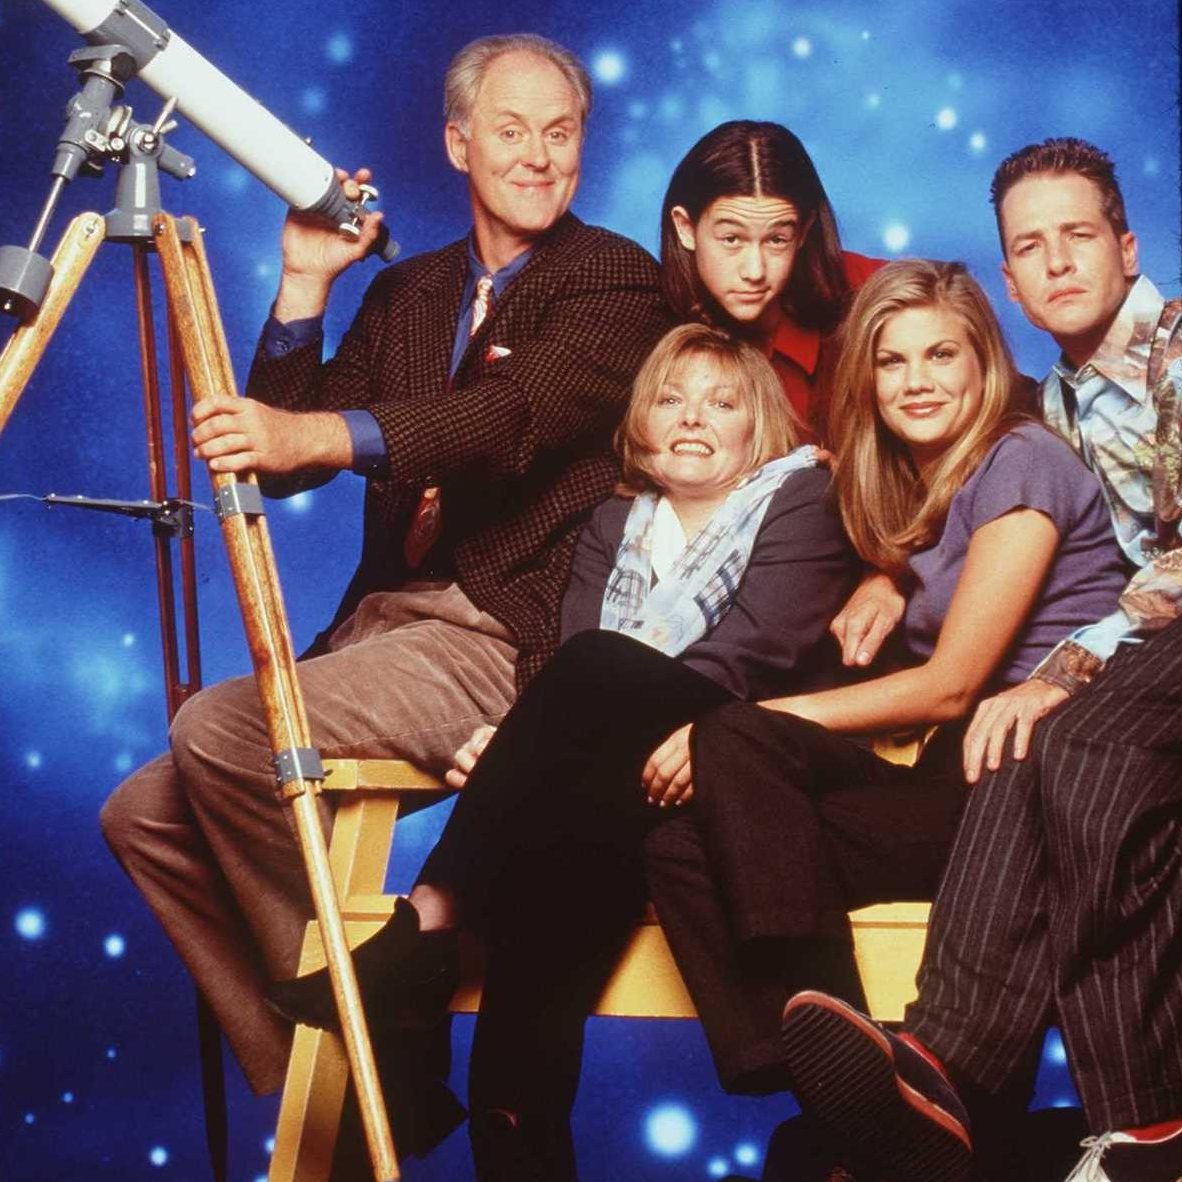 Cast of 3rd Rock from the Sun, 1996